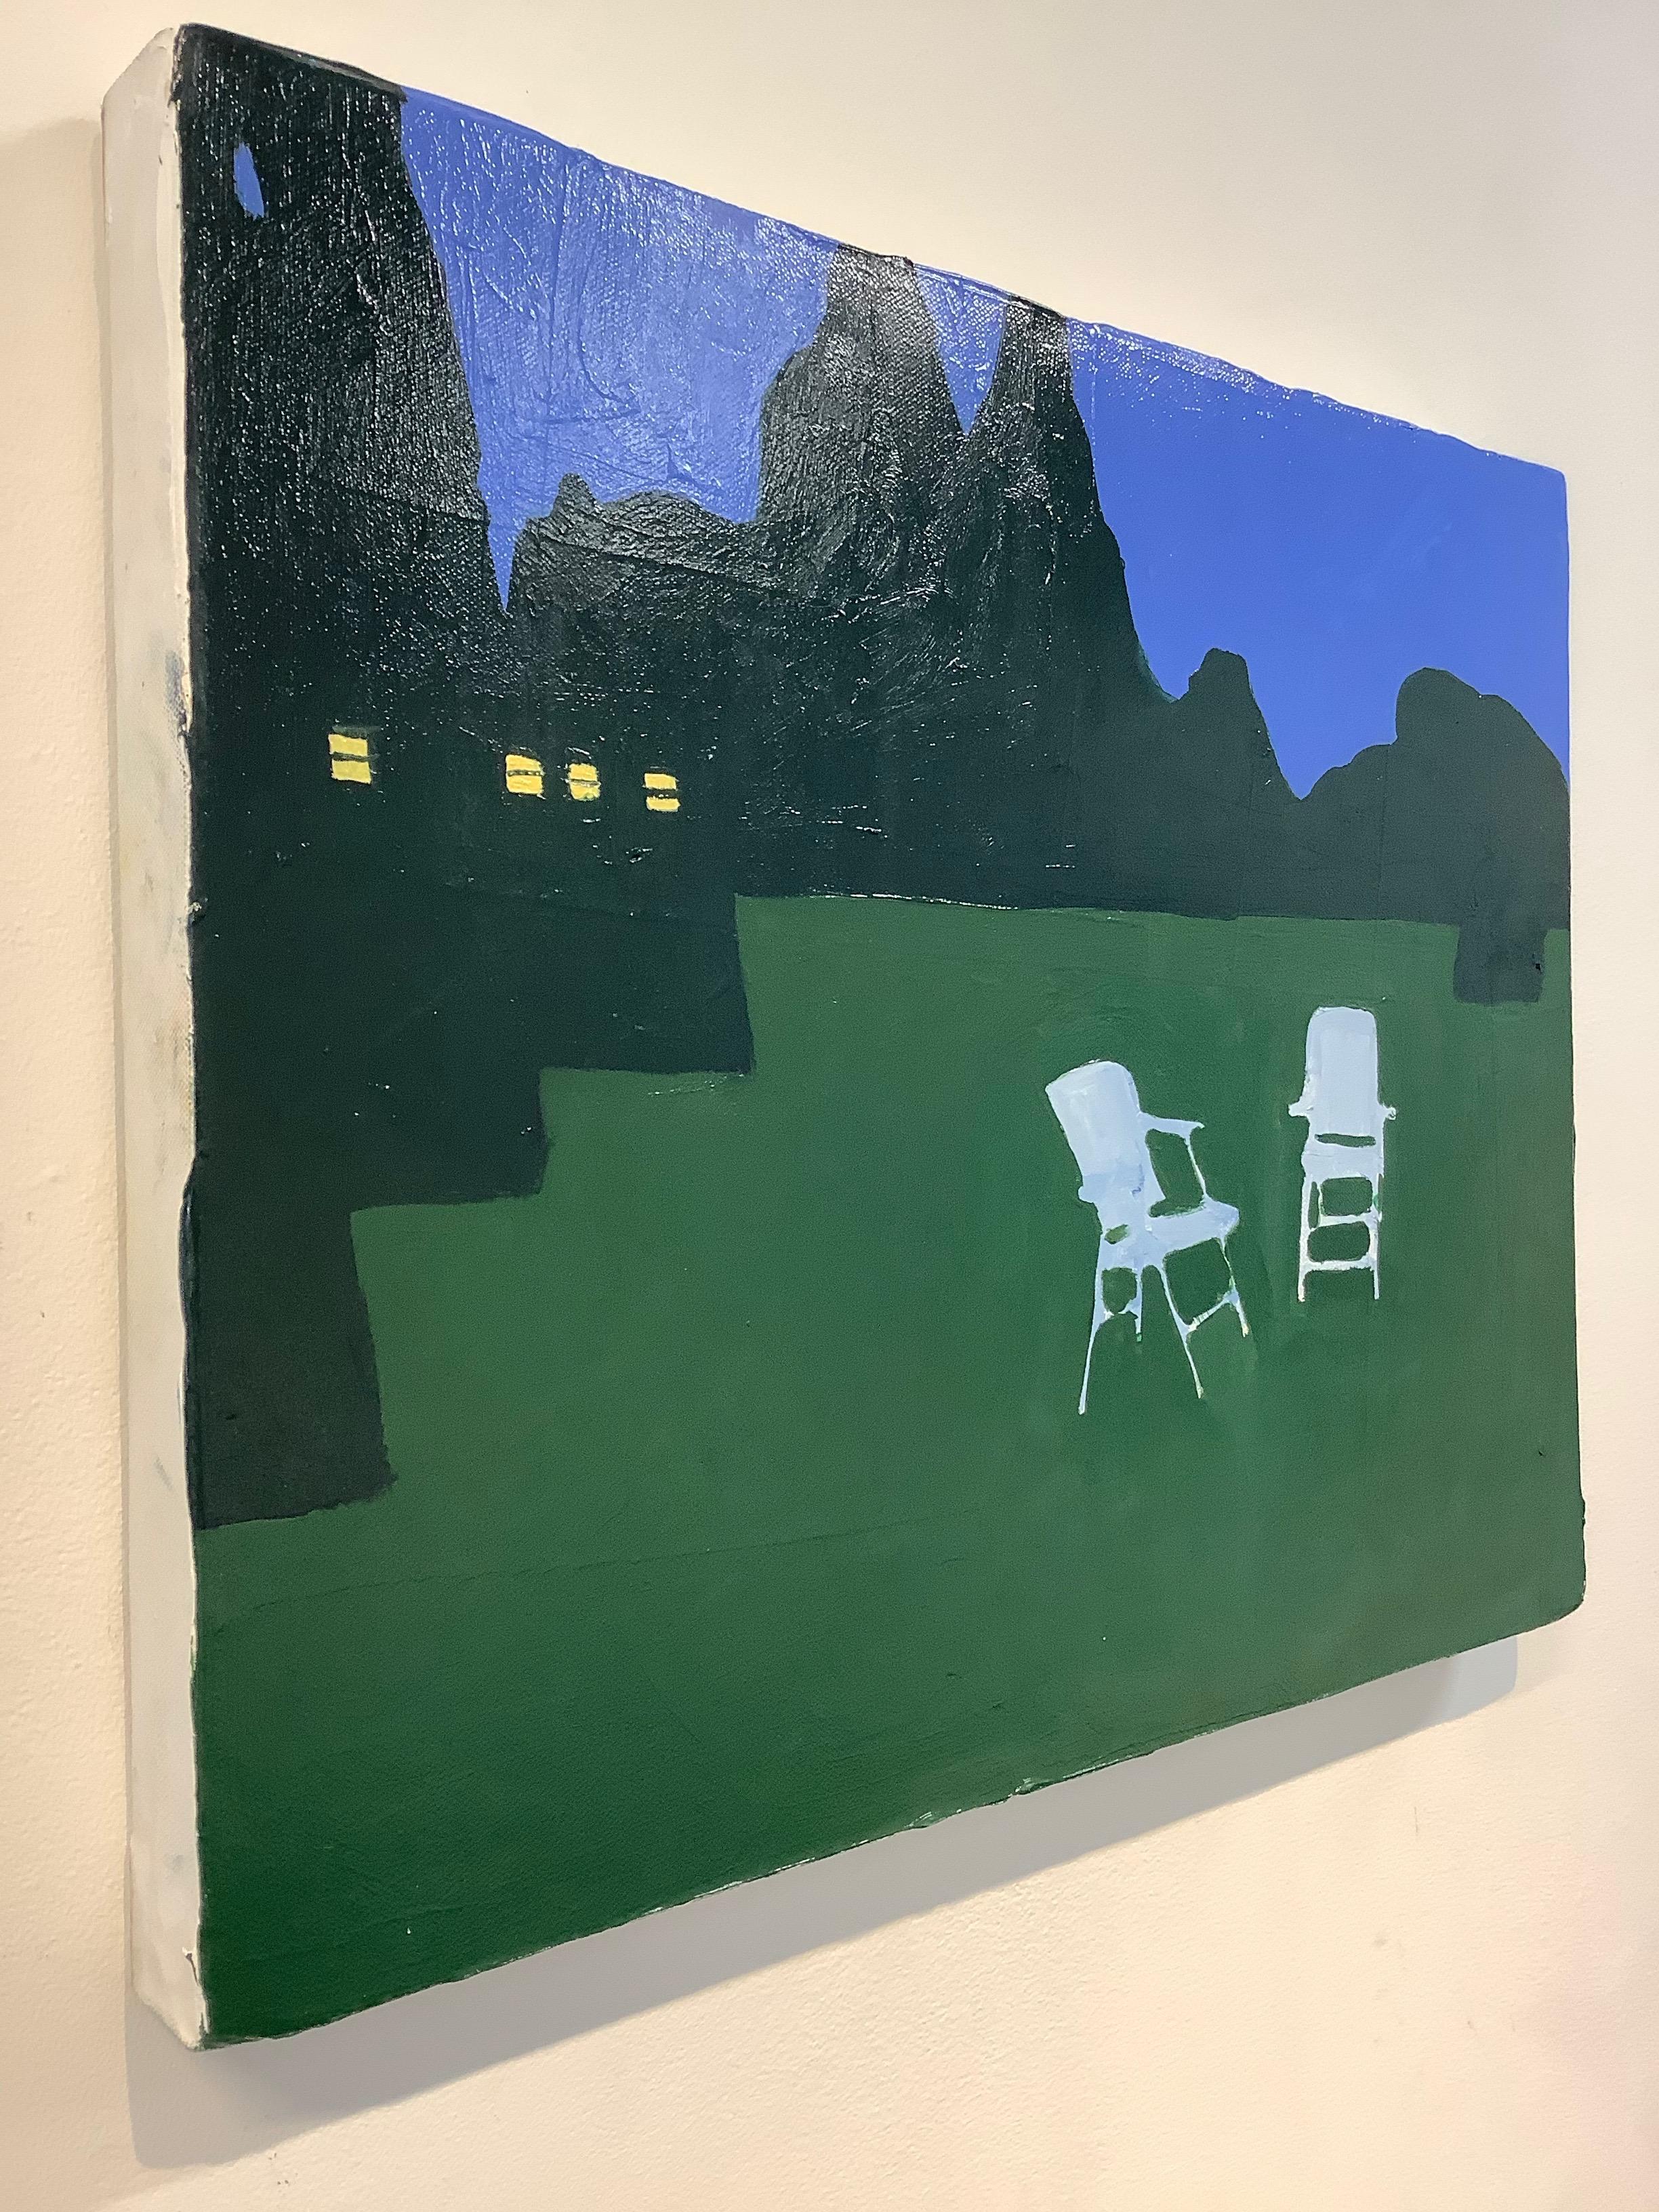 In this landscape painting by Sophie Treppendahl, a cabin with white lawn chairs in the garden is peaceful and quiet against a dense forest with dark green pine trees in the background. Within the windows of the blue cabin, soft light glows from the